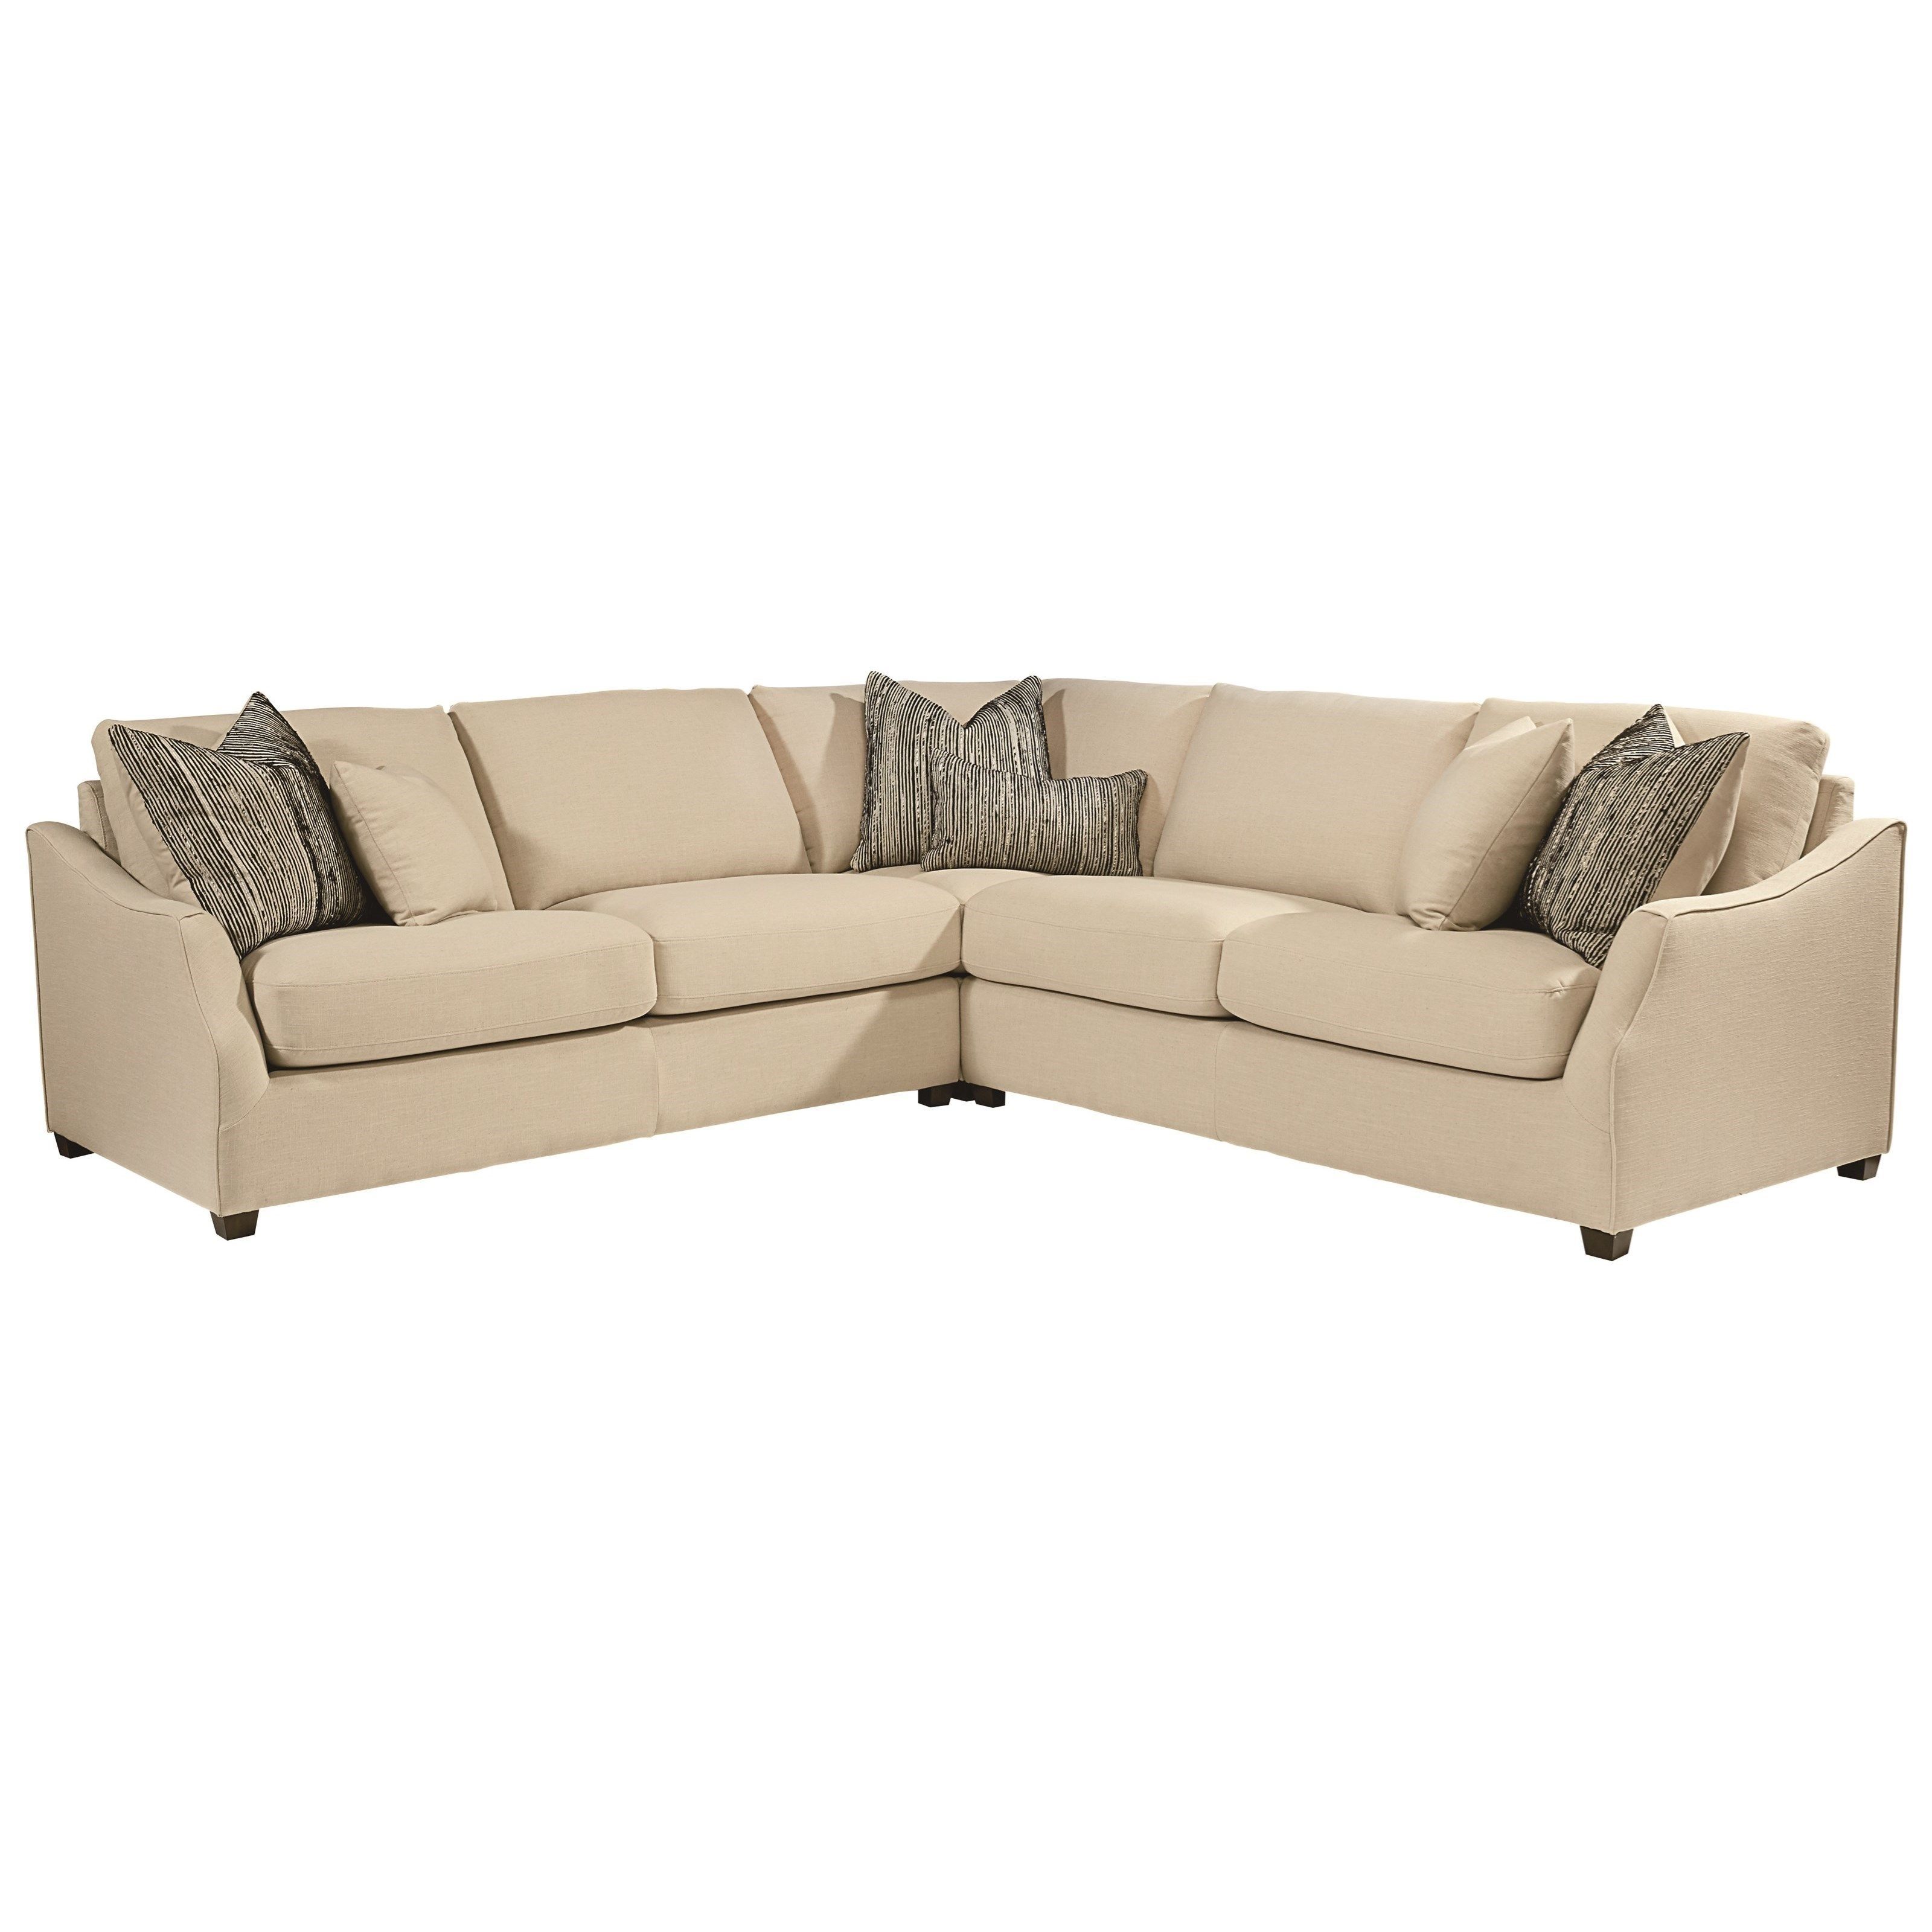 Magnolia Homejoanna Gaines Homestead Three Piece Sectional With Regard To Minneapolis Sectional Sofas (View 8 of 10)